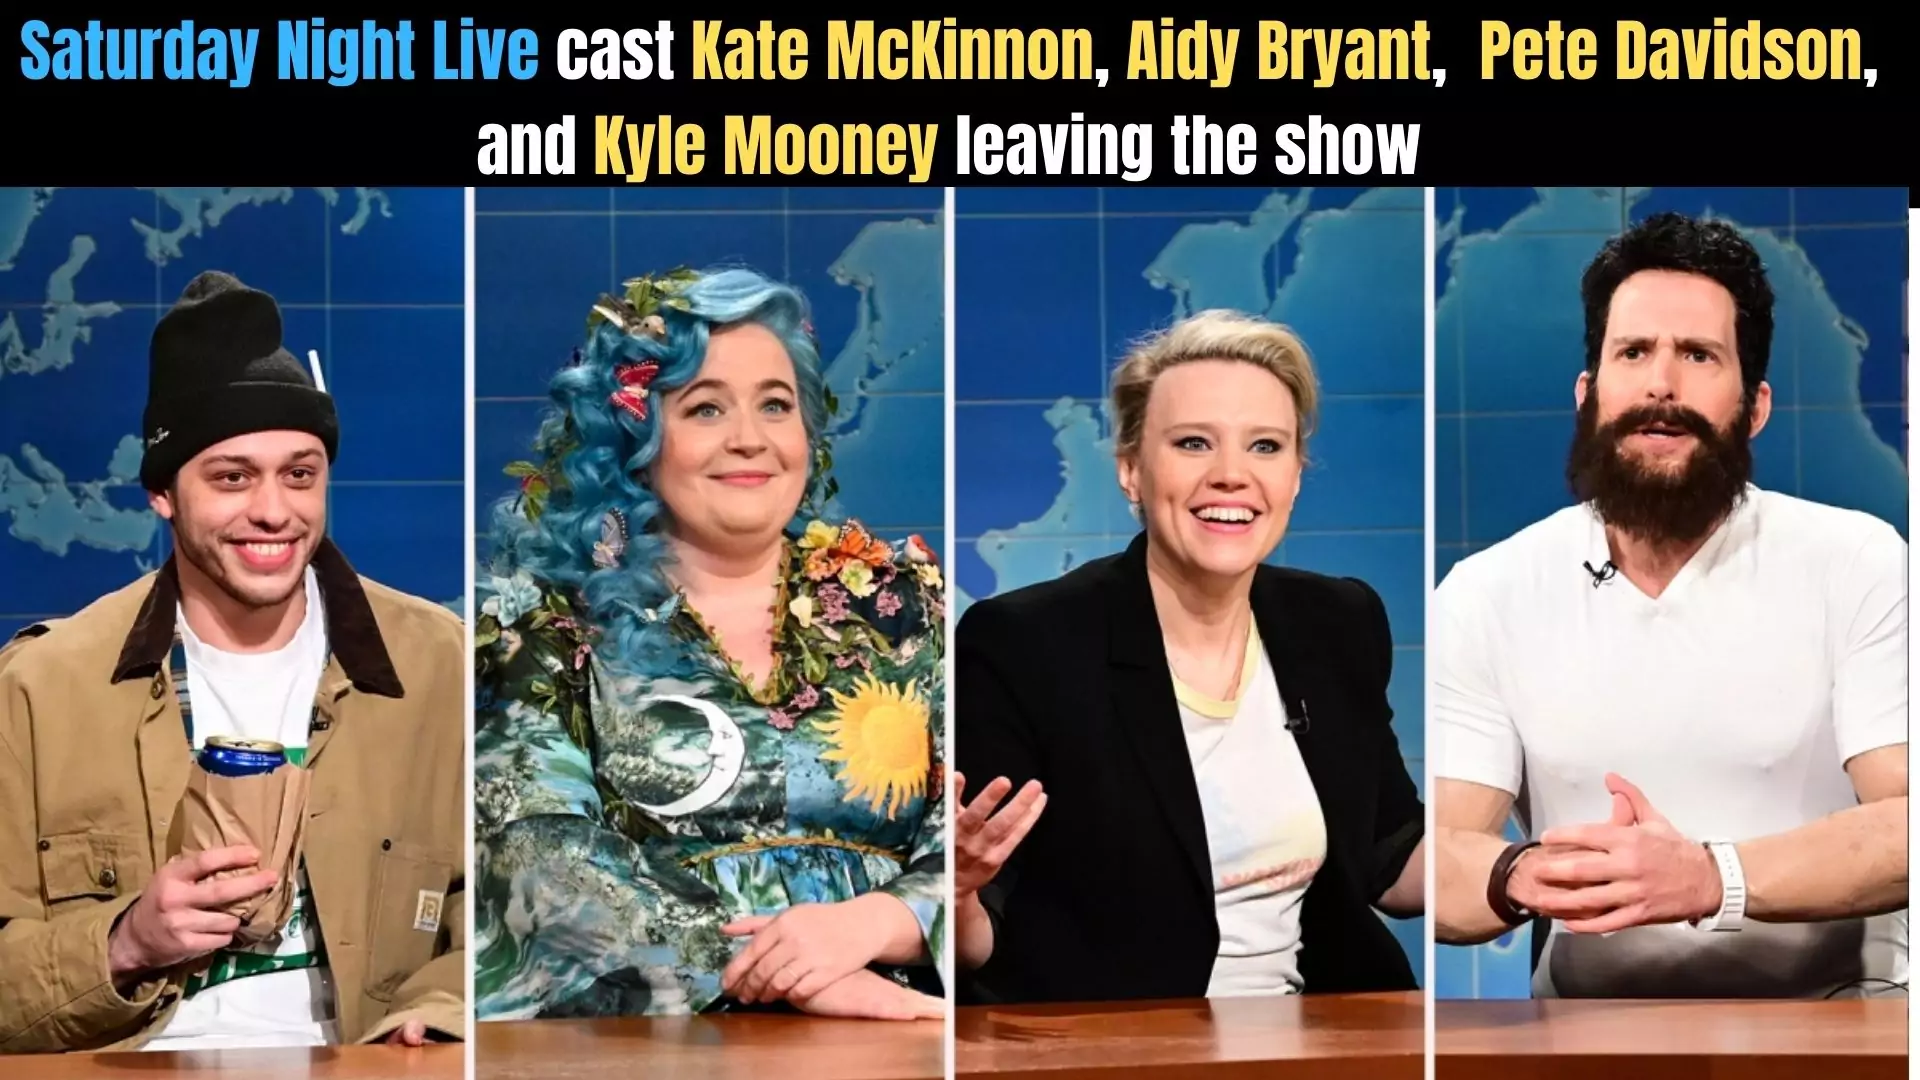 Saturday Night Live cast Kate McKinnon, Aidy Bryant, Pete Davidson and Kyle Mooney Leaving the show